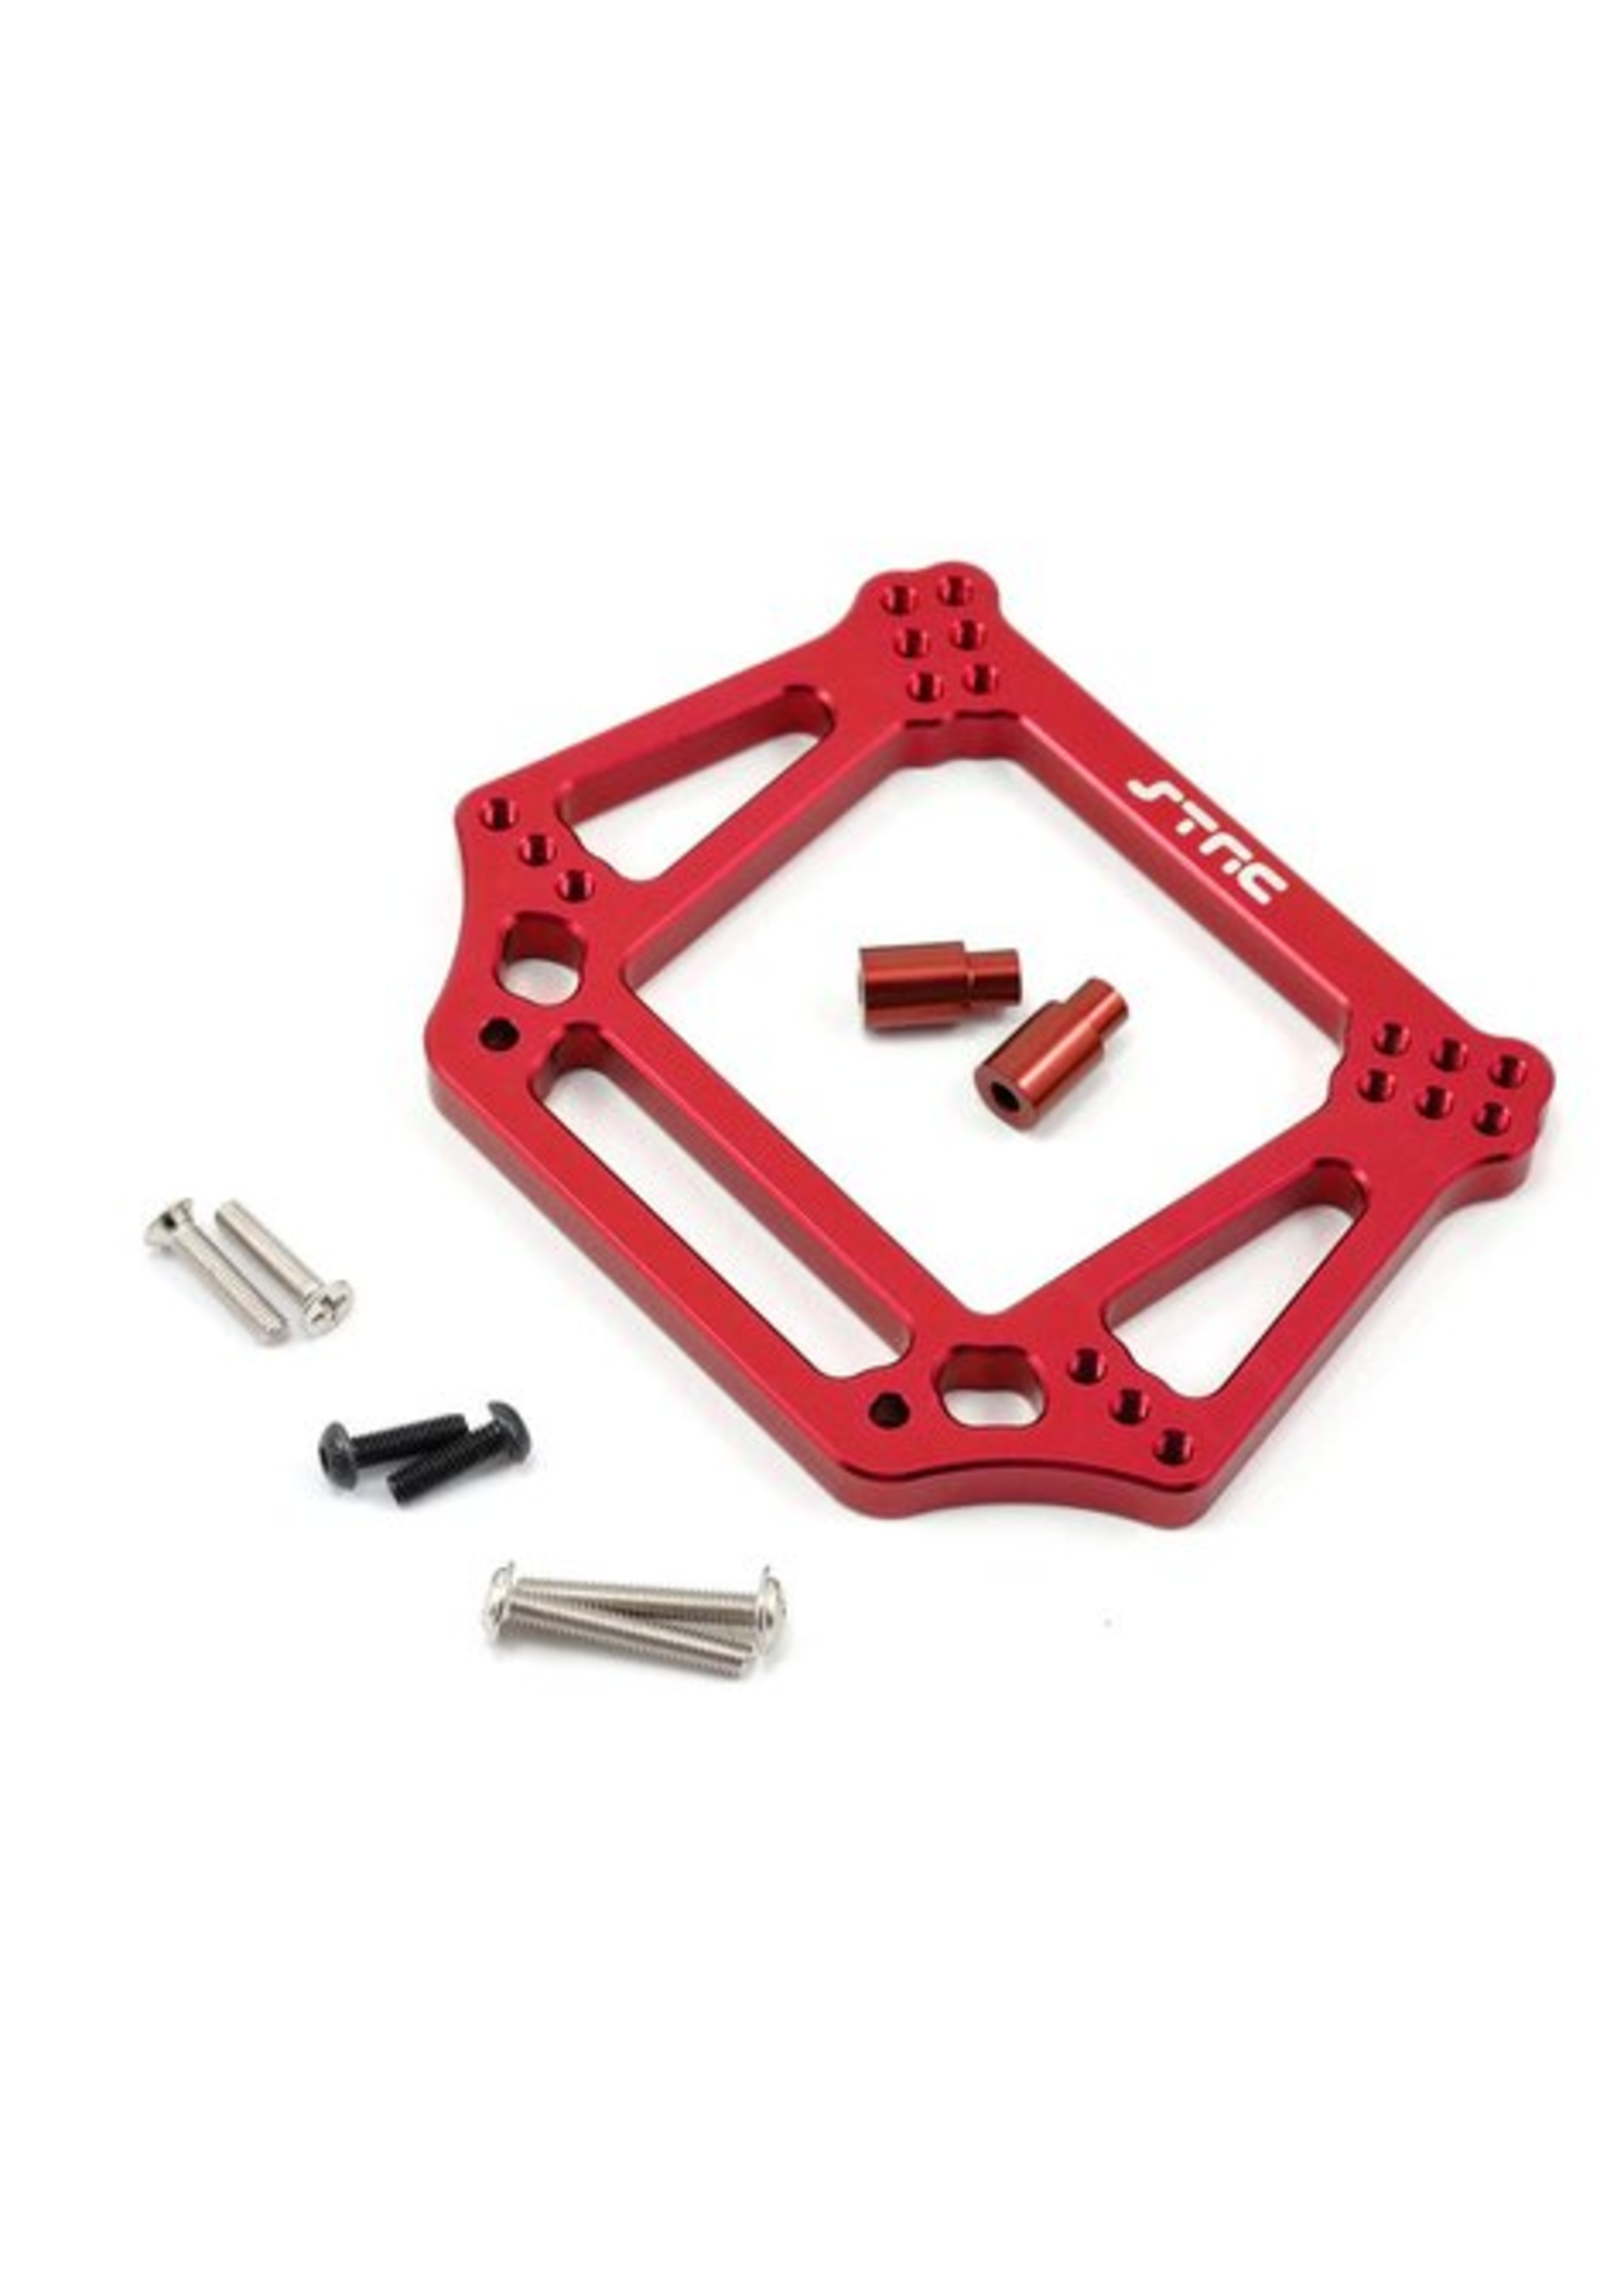 ST Racing Concepts SPTST3639R ST Racing Concepts Aluminum 6mm Heavy Duty Front Shock Tower for Traxxas Stampede/Rustler/Bandit/Slash (Red)